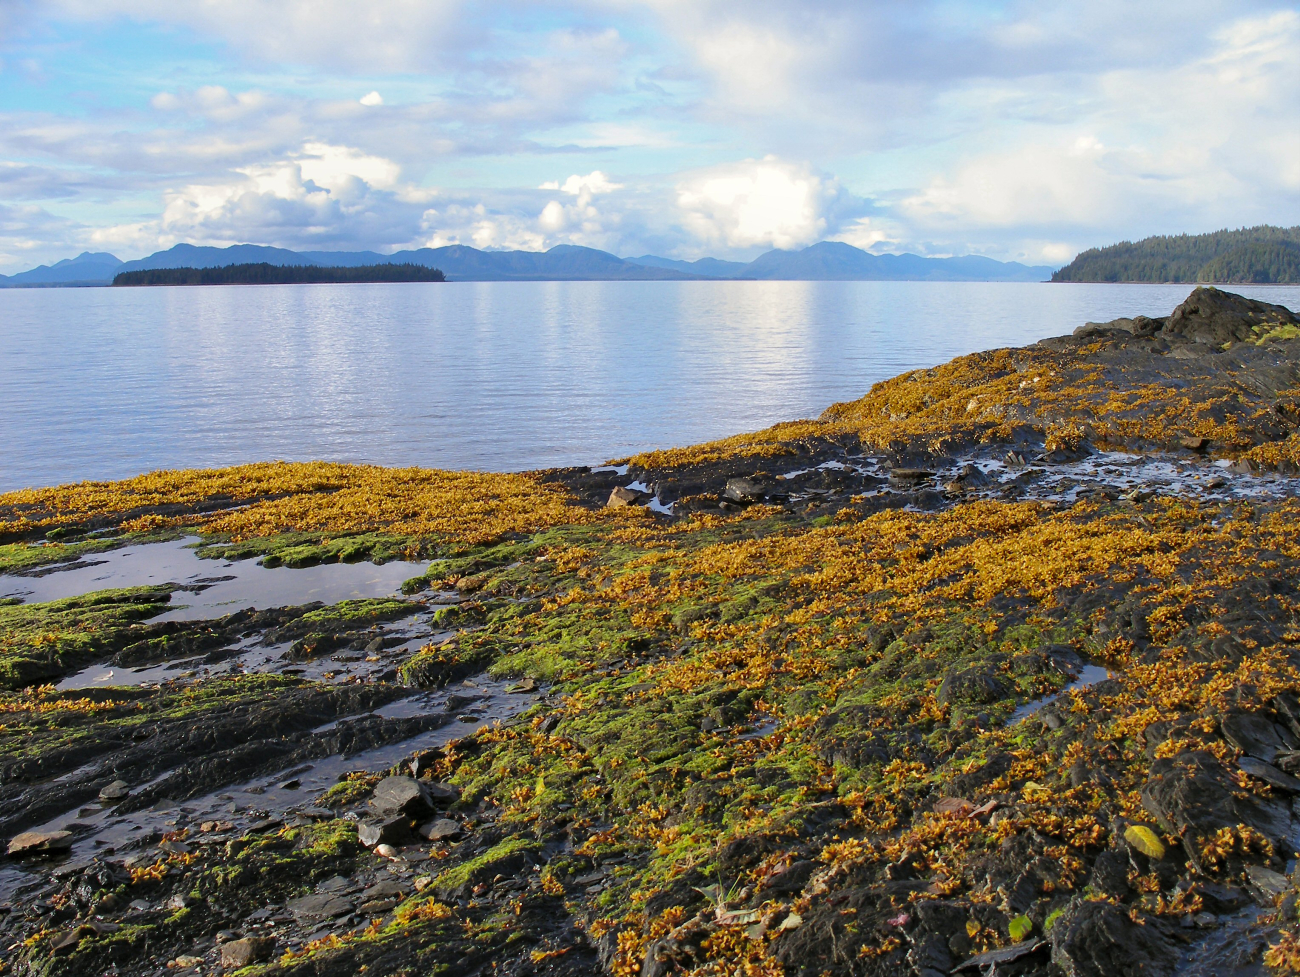 Low tide at Settlers Cove in the Ketchikan area